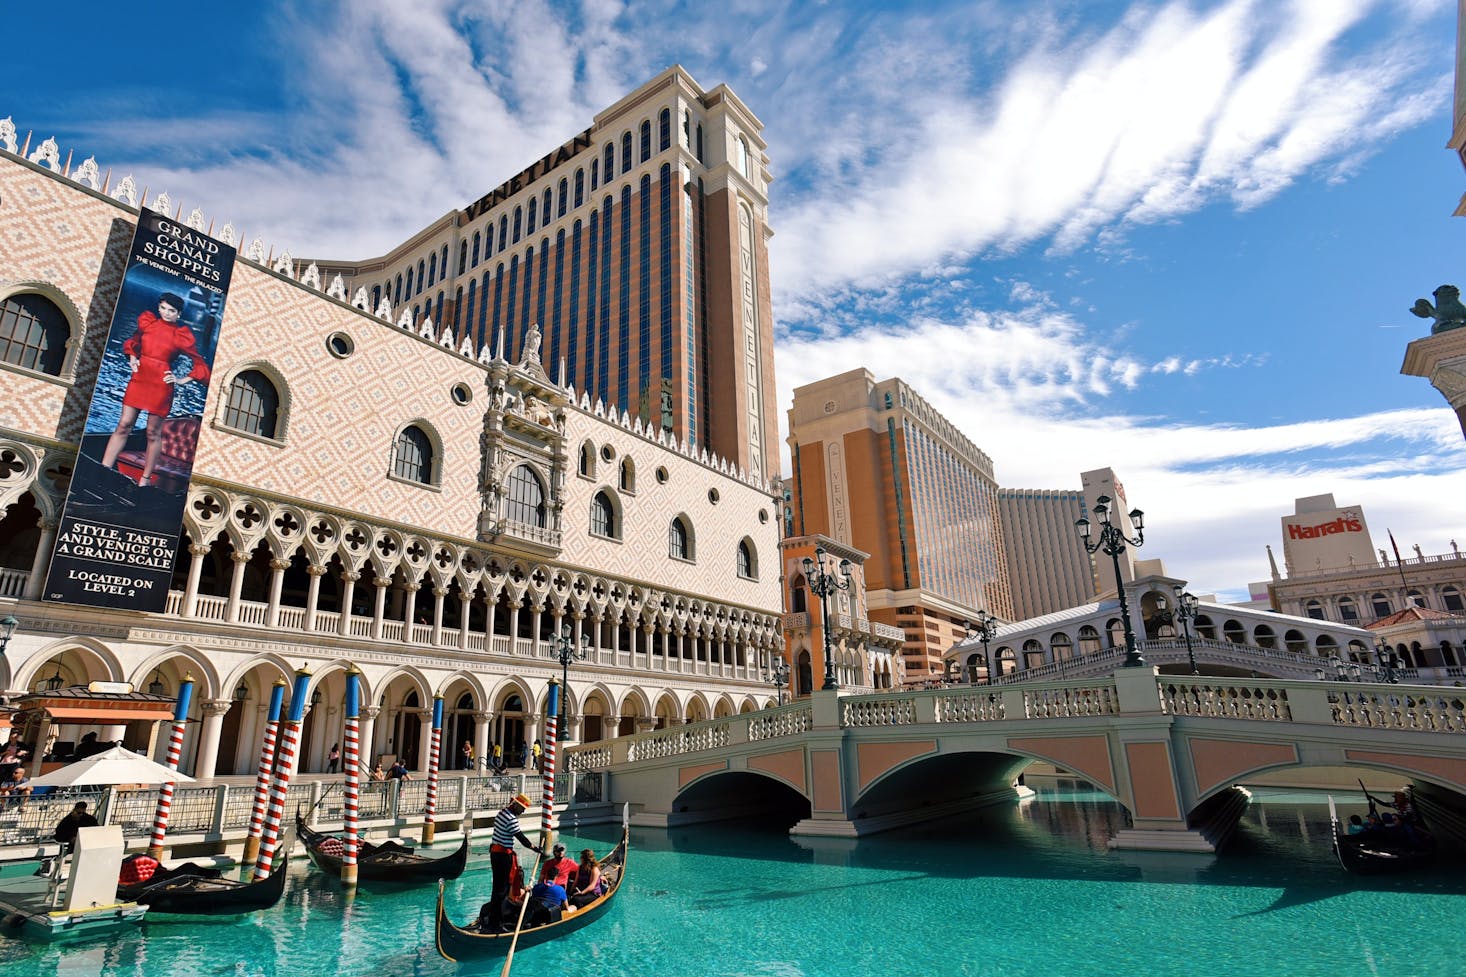 Gondola rides with kids at the Venetian in Las Vegas